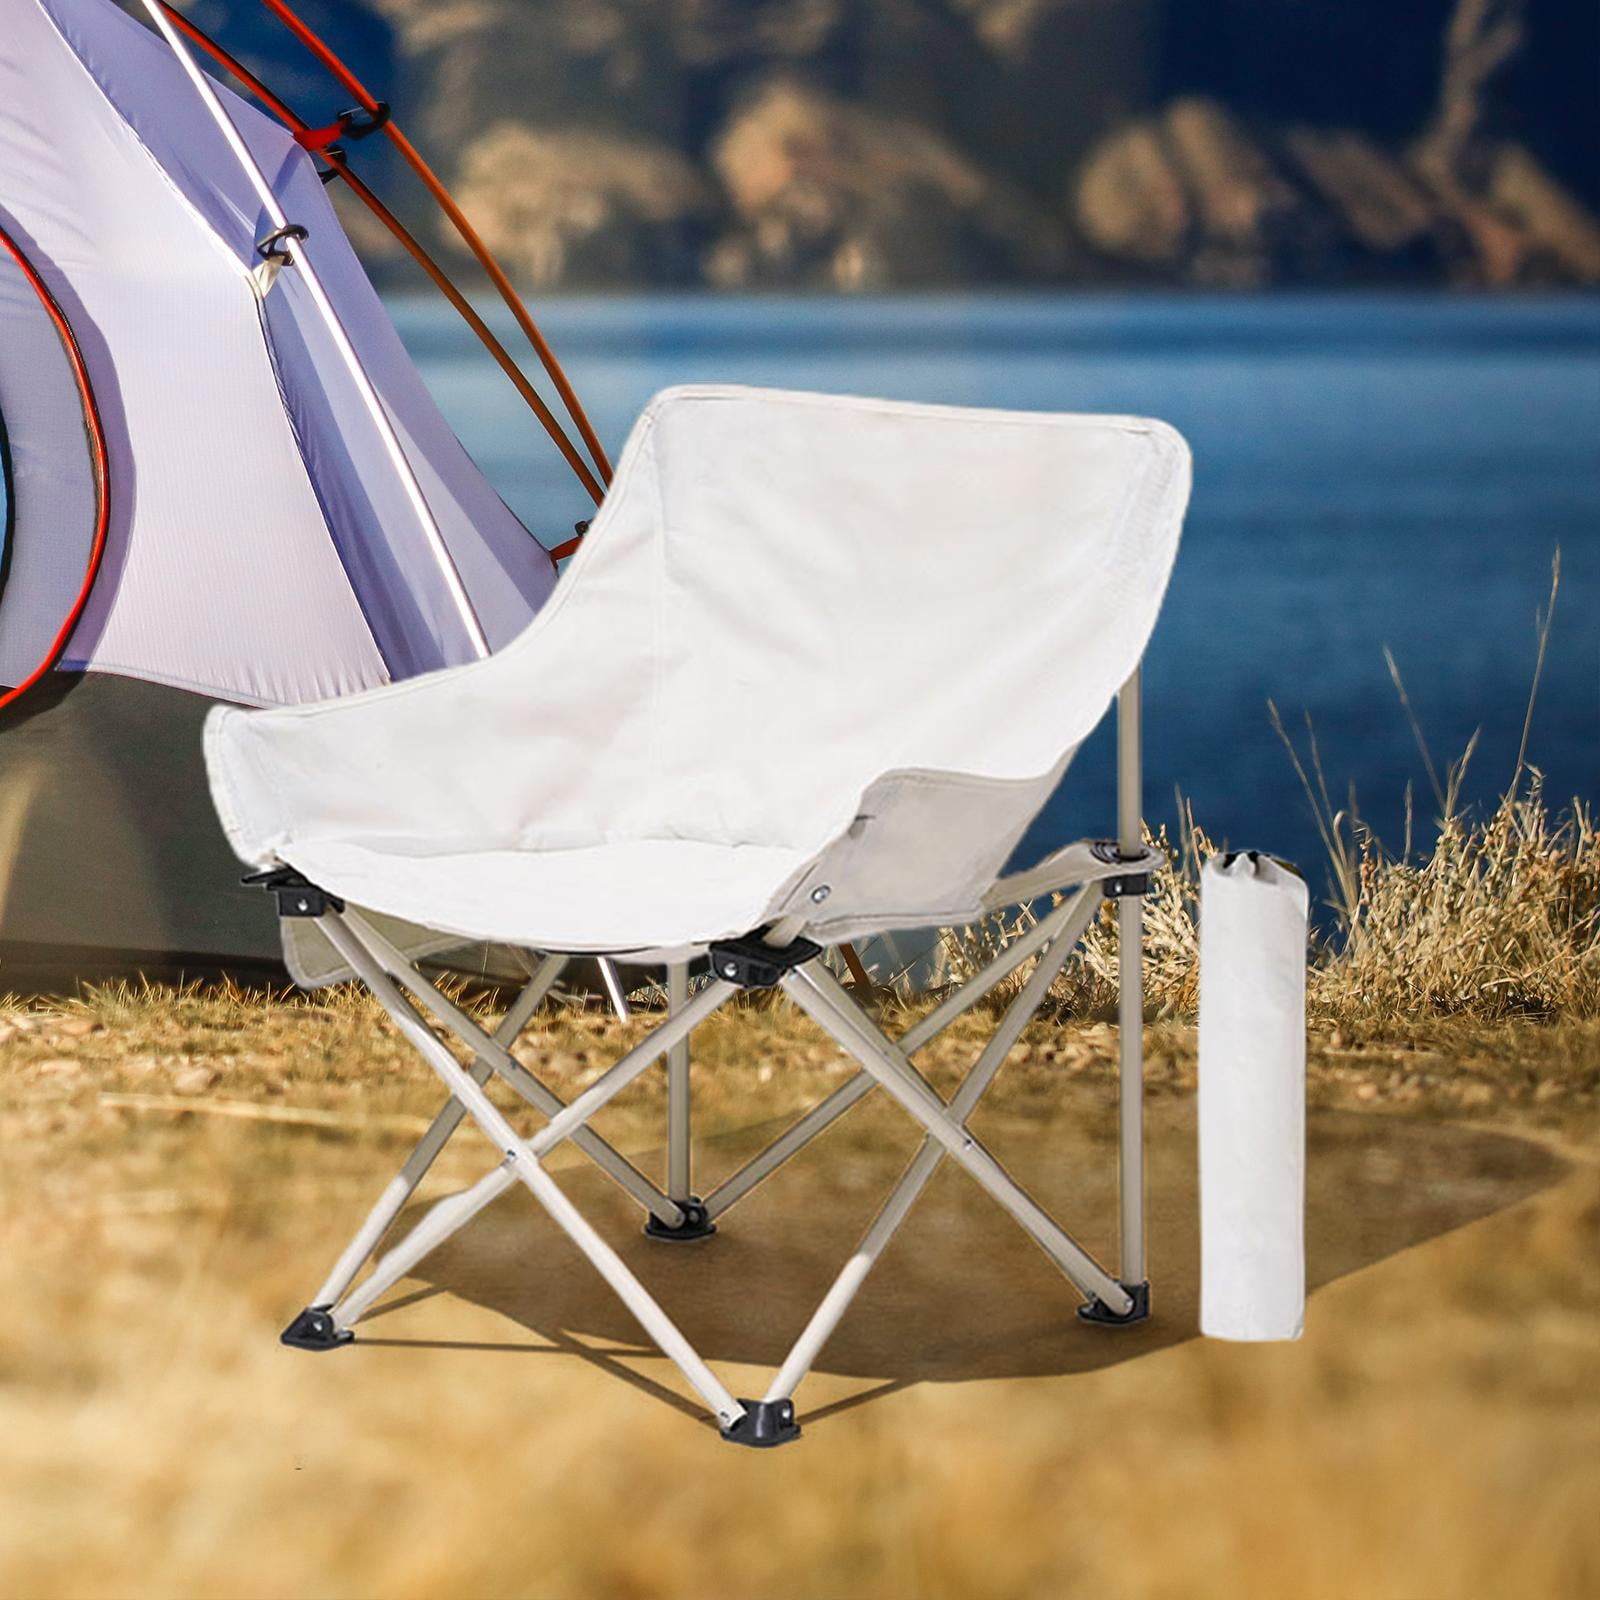 Lightweight Folding Chair Camping Stool Chair Lightweight Collapsible Beach Chair  Folding Camping Chair for Backpacking Fishing Sports Beach White 